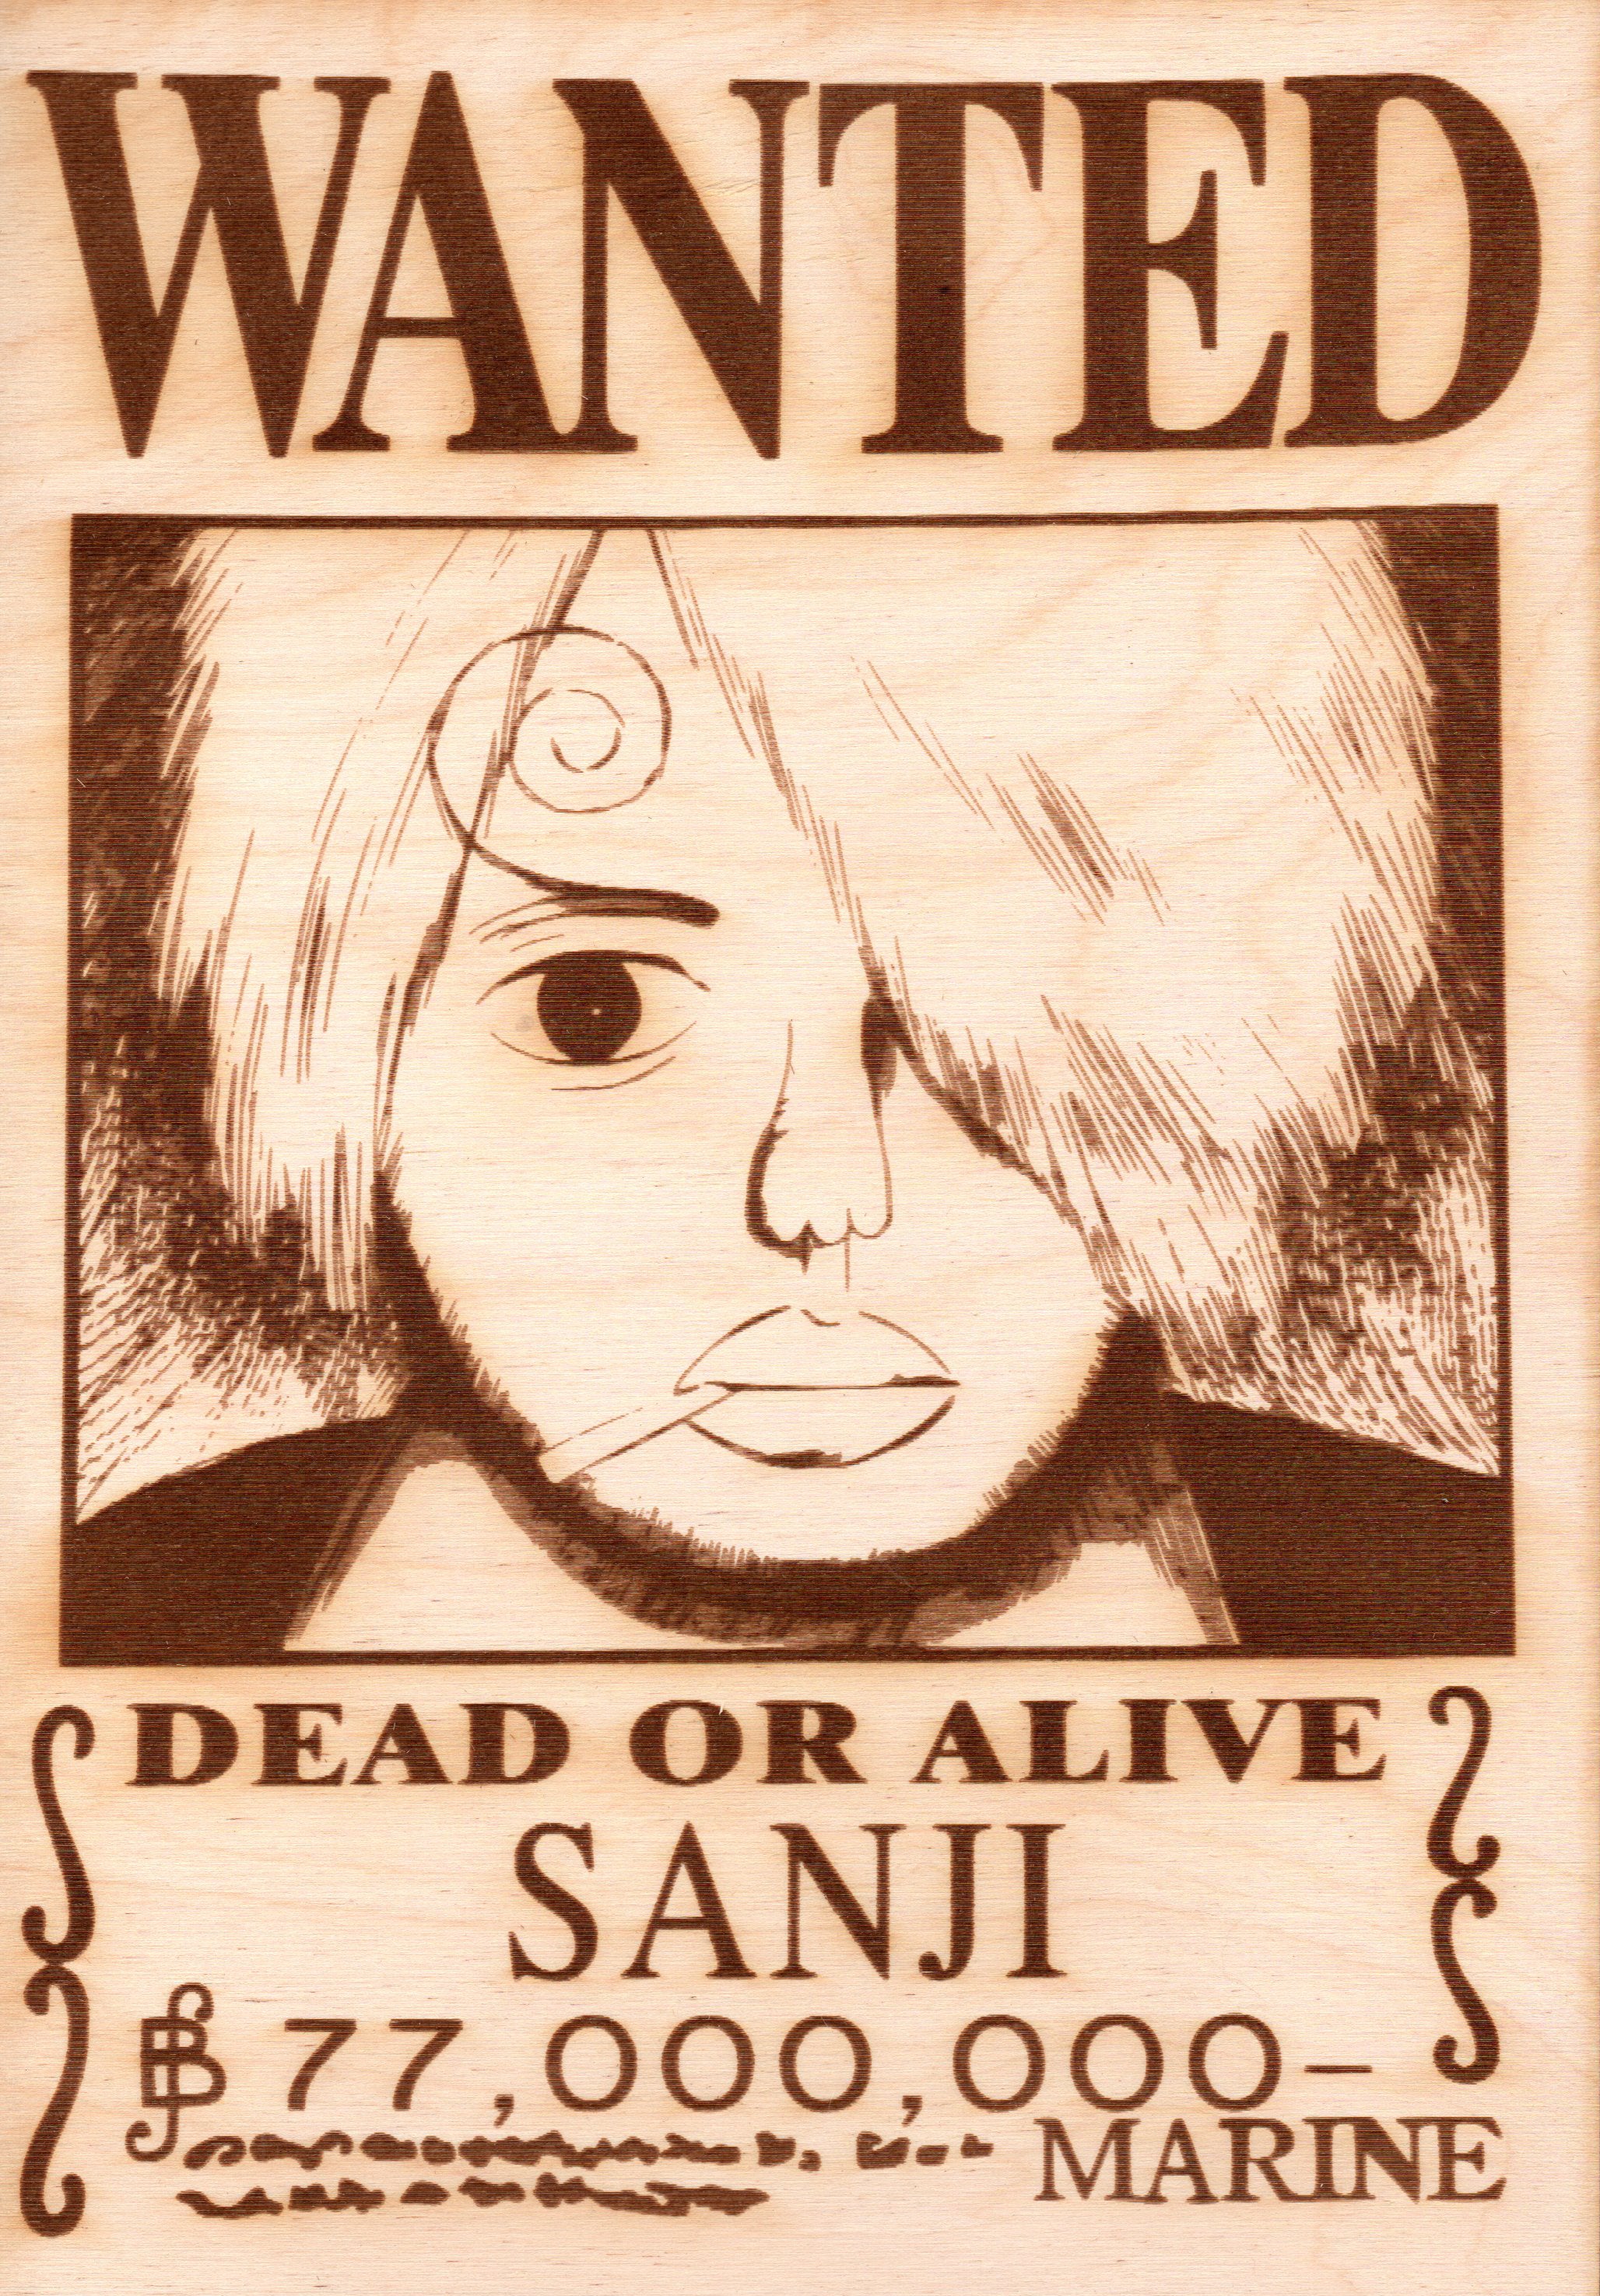 One Piece Sanji Fake Wooden Wanted Poster Tantrumcollectibles Com